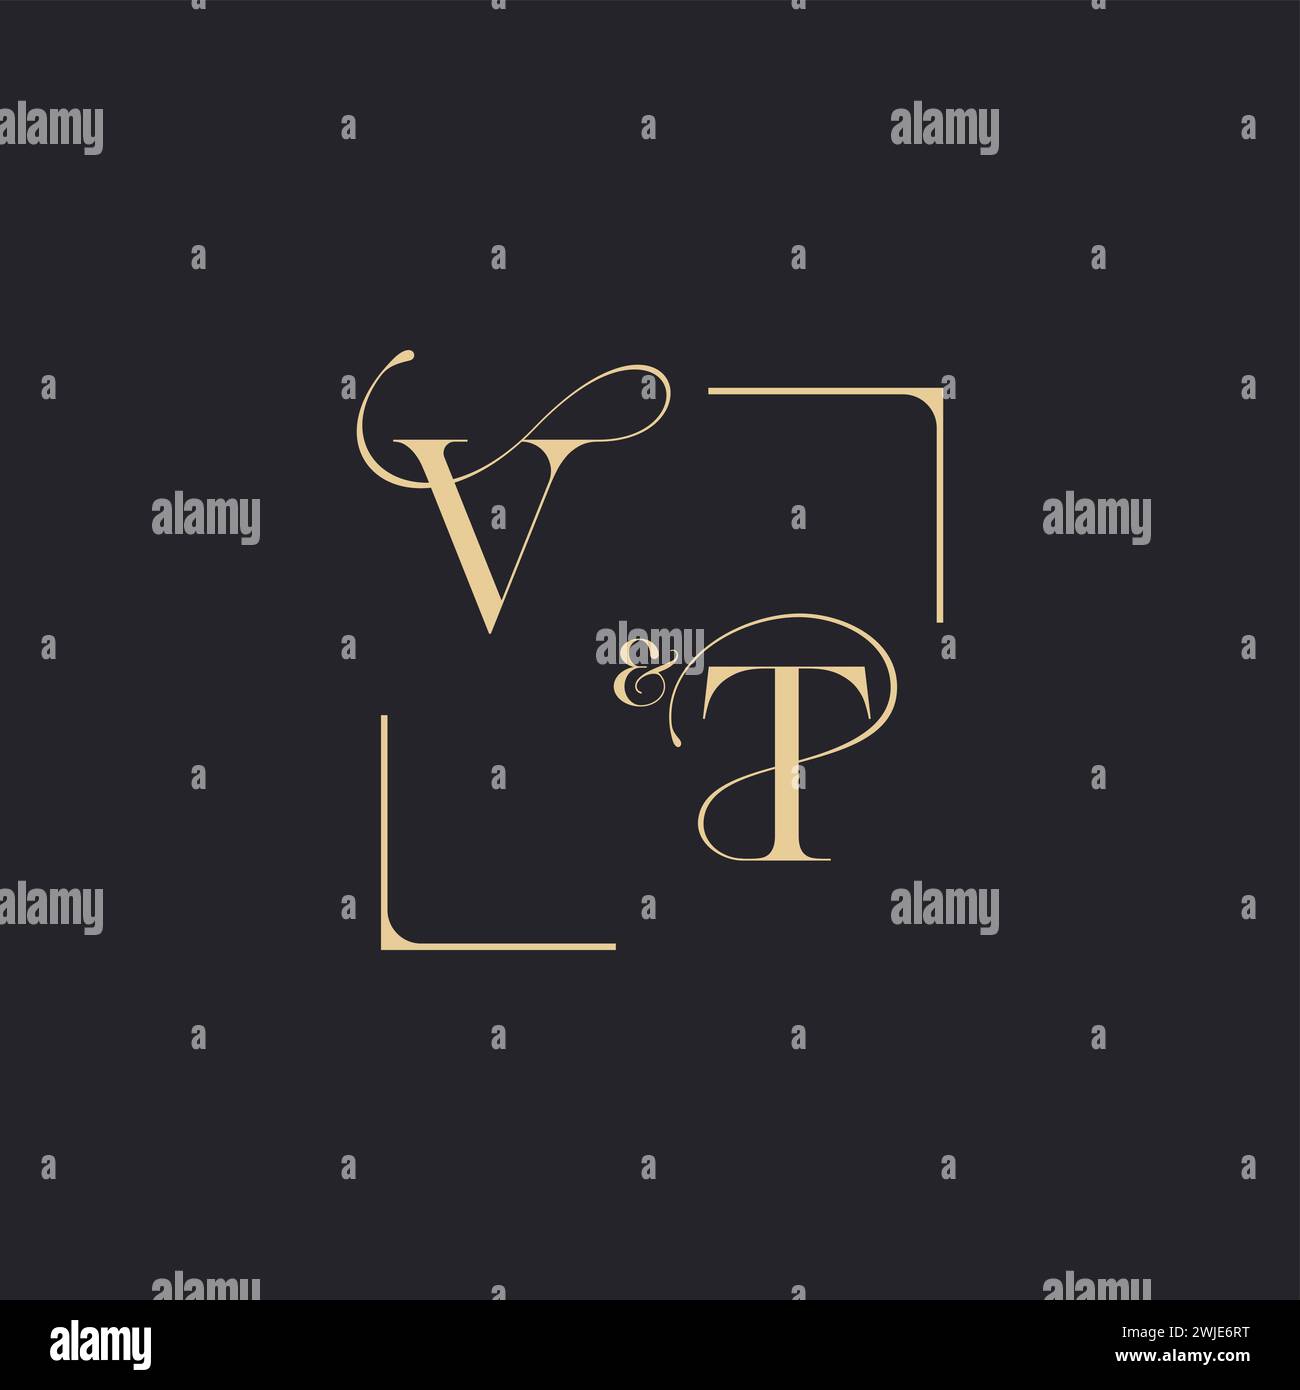 VT simple concept of wedding outline logo and square of initial design gold in white background Stock Vector